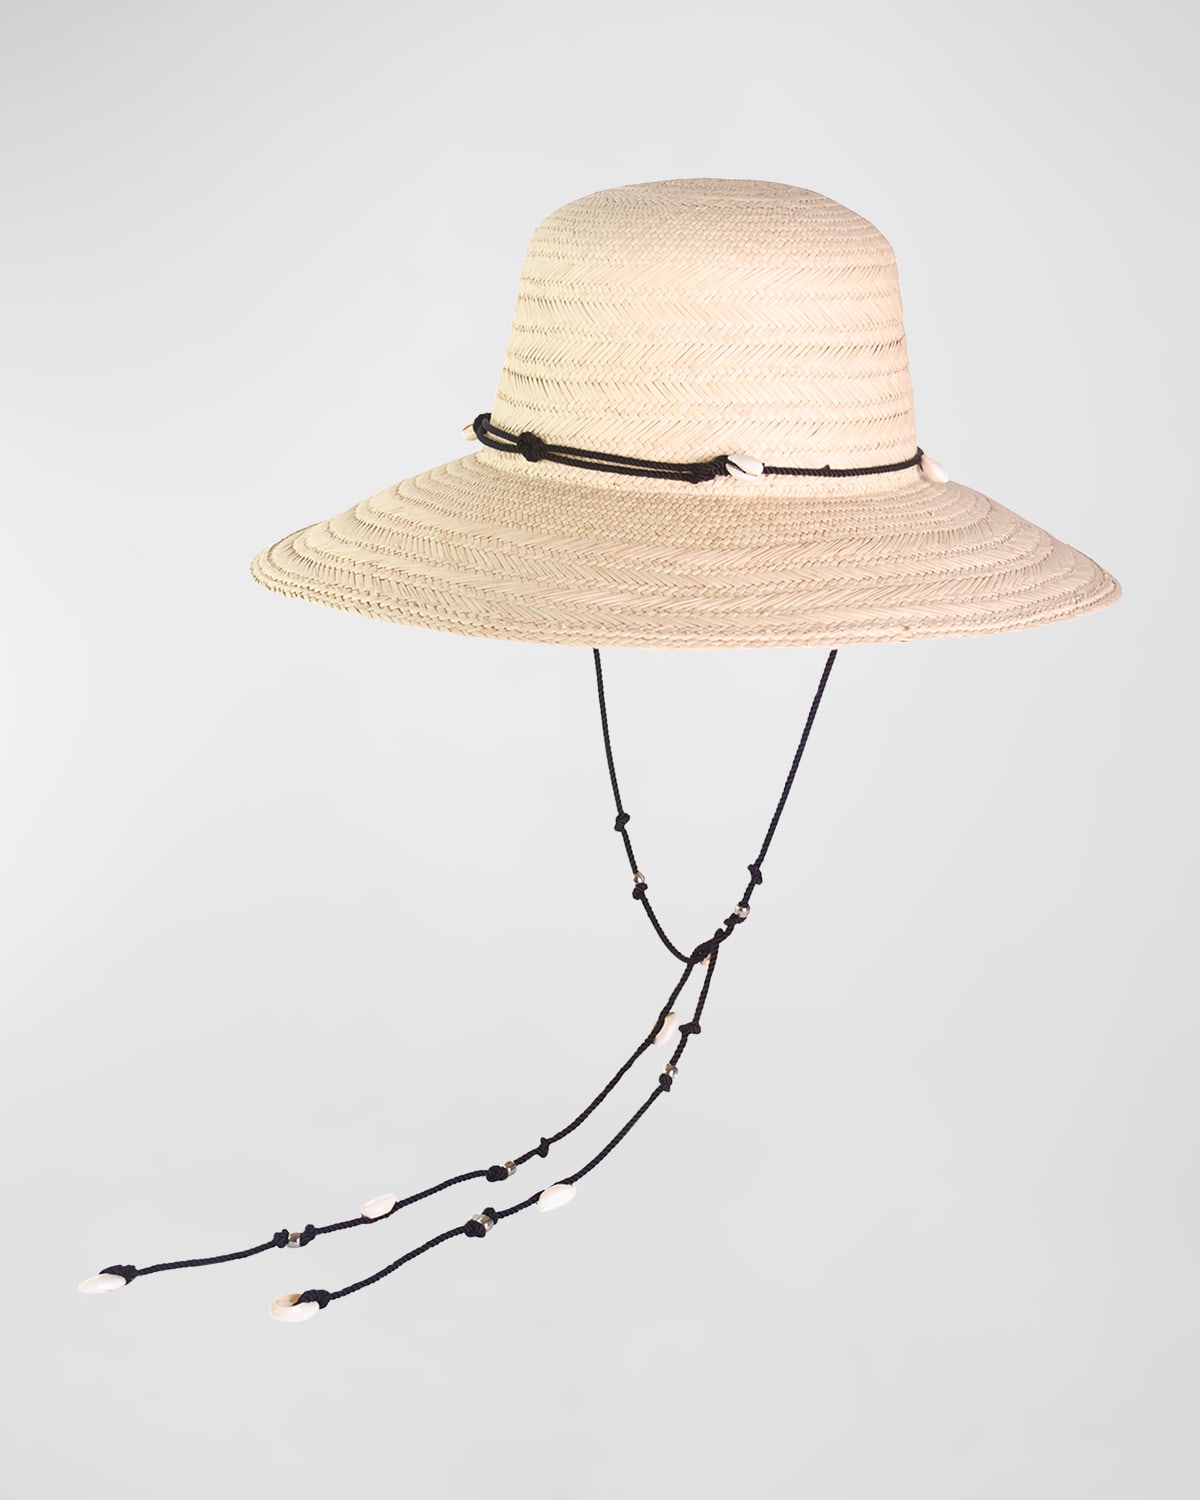 Sensi Studio Lampshade Texturized Straw Bucket Hat With Shells In Brown